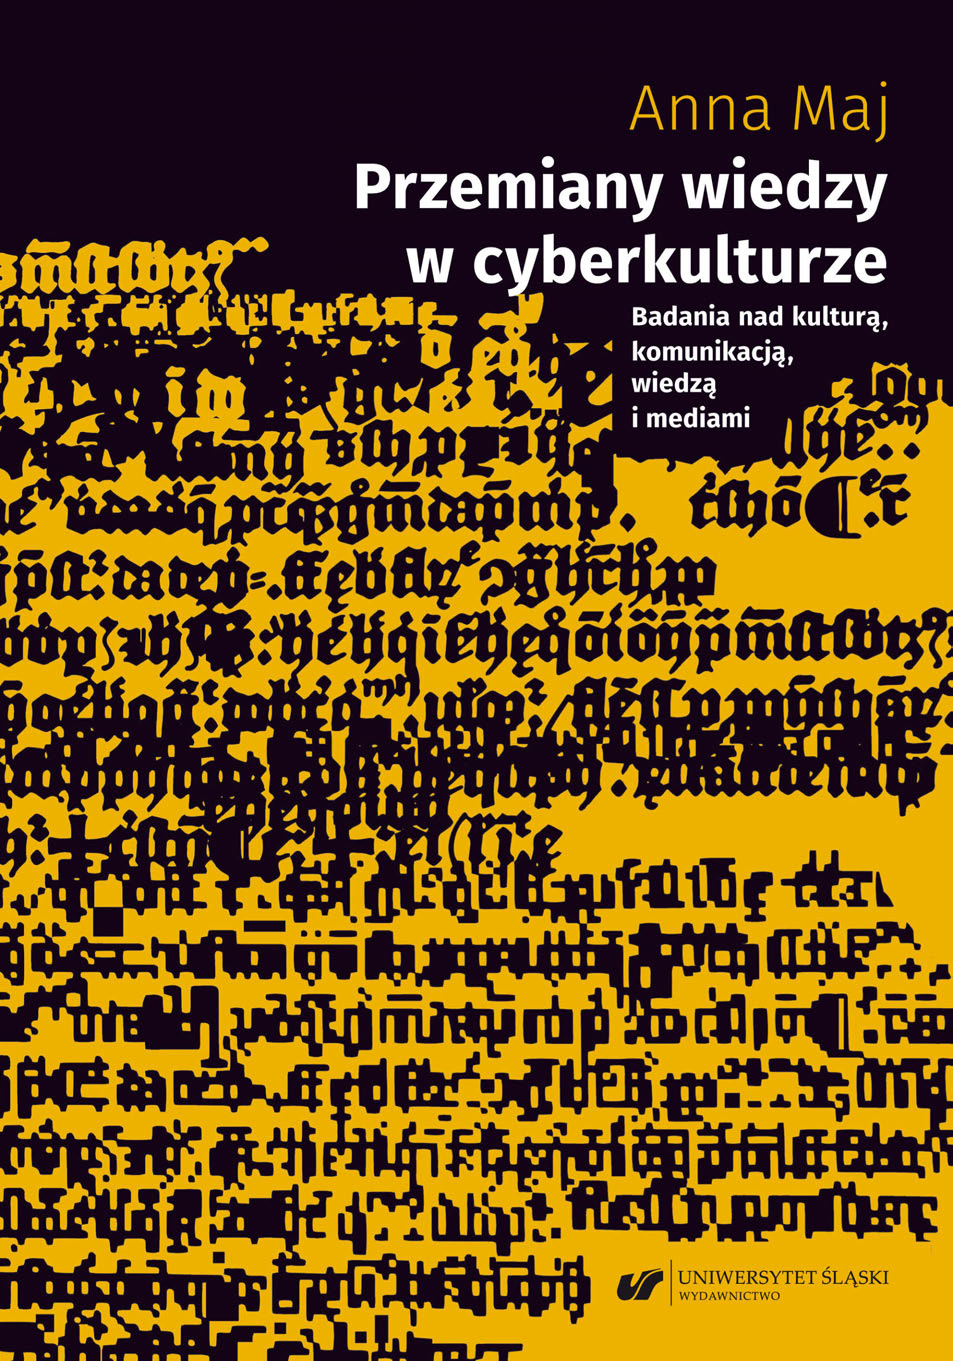 Transformations of knowledge in cyberculture. Research on culture, communication, knowledge, and media Cover Image